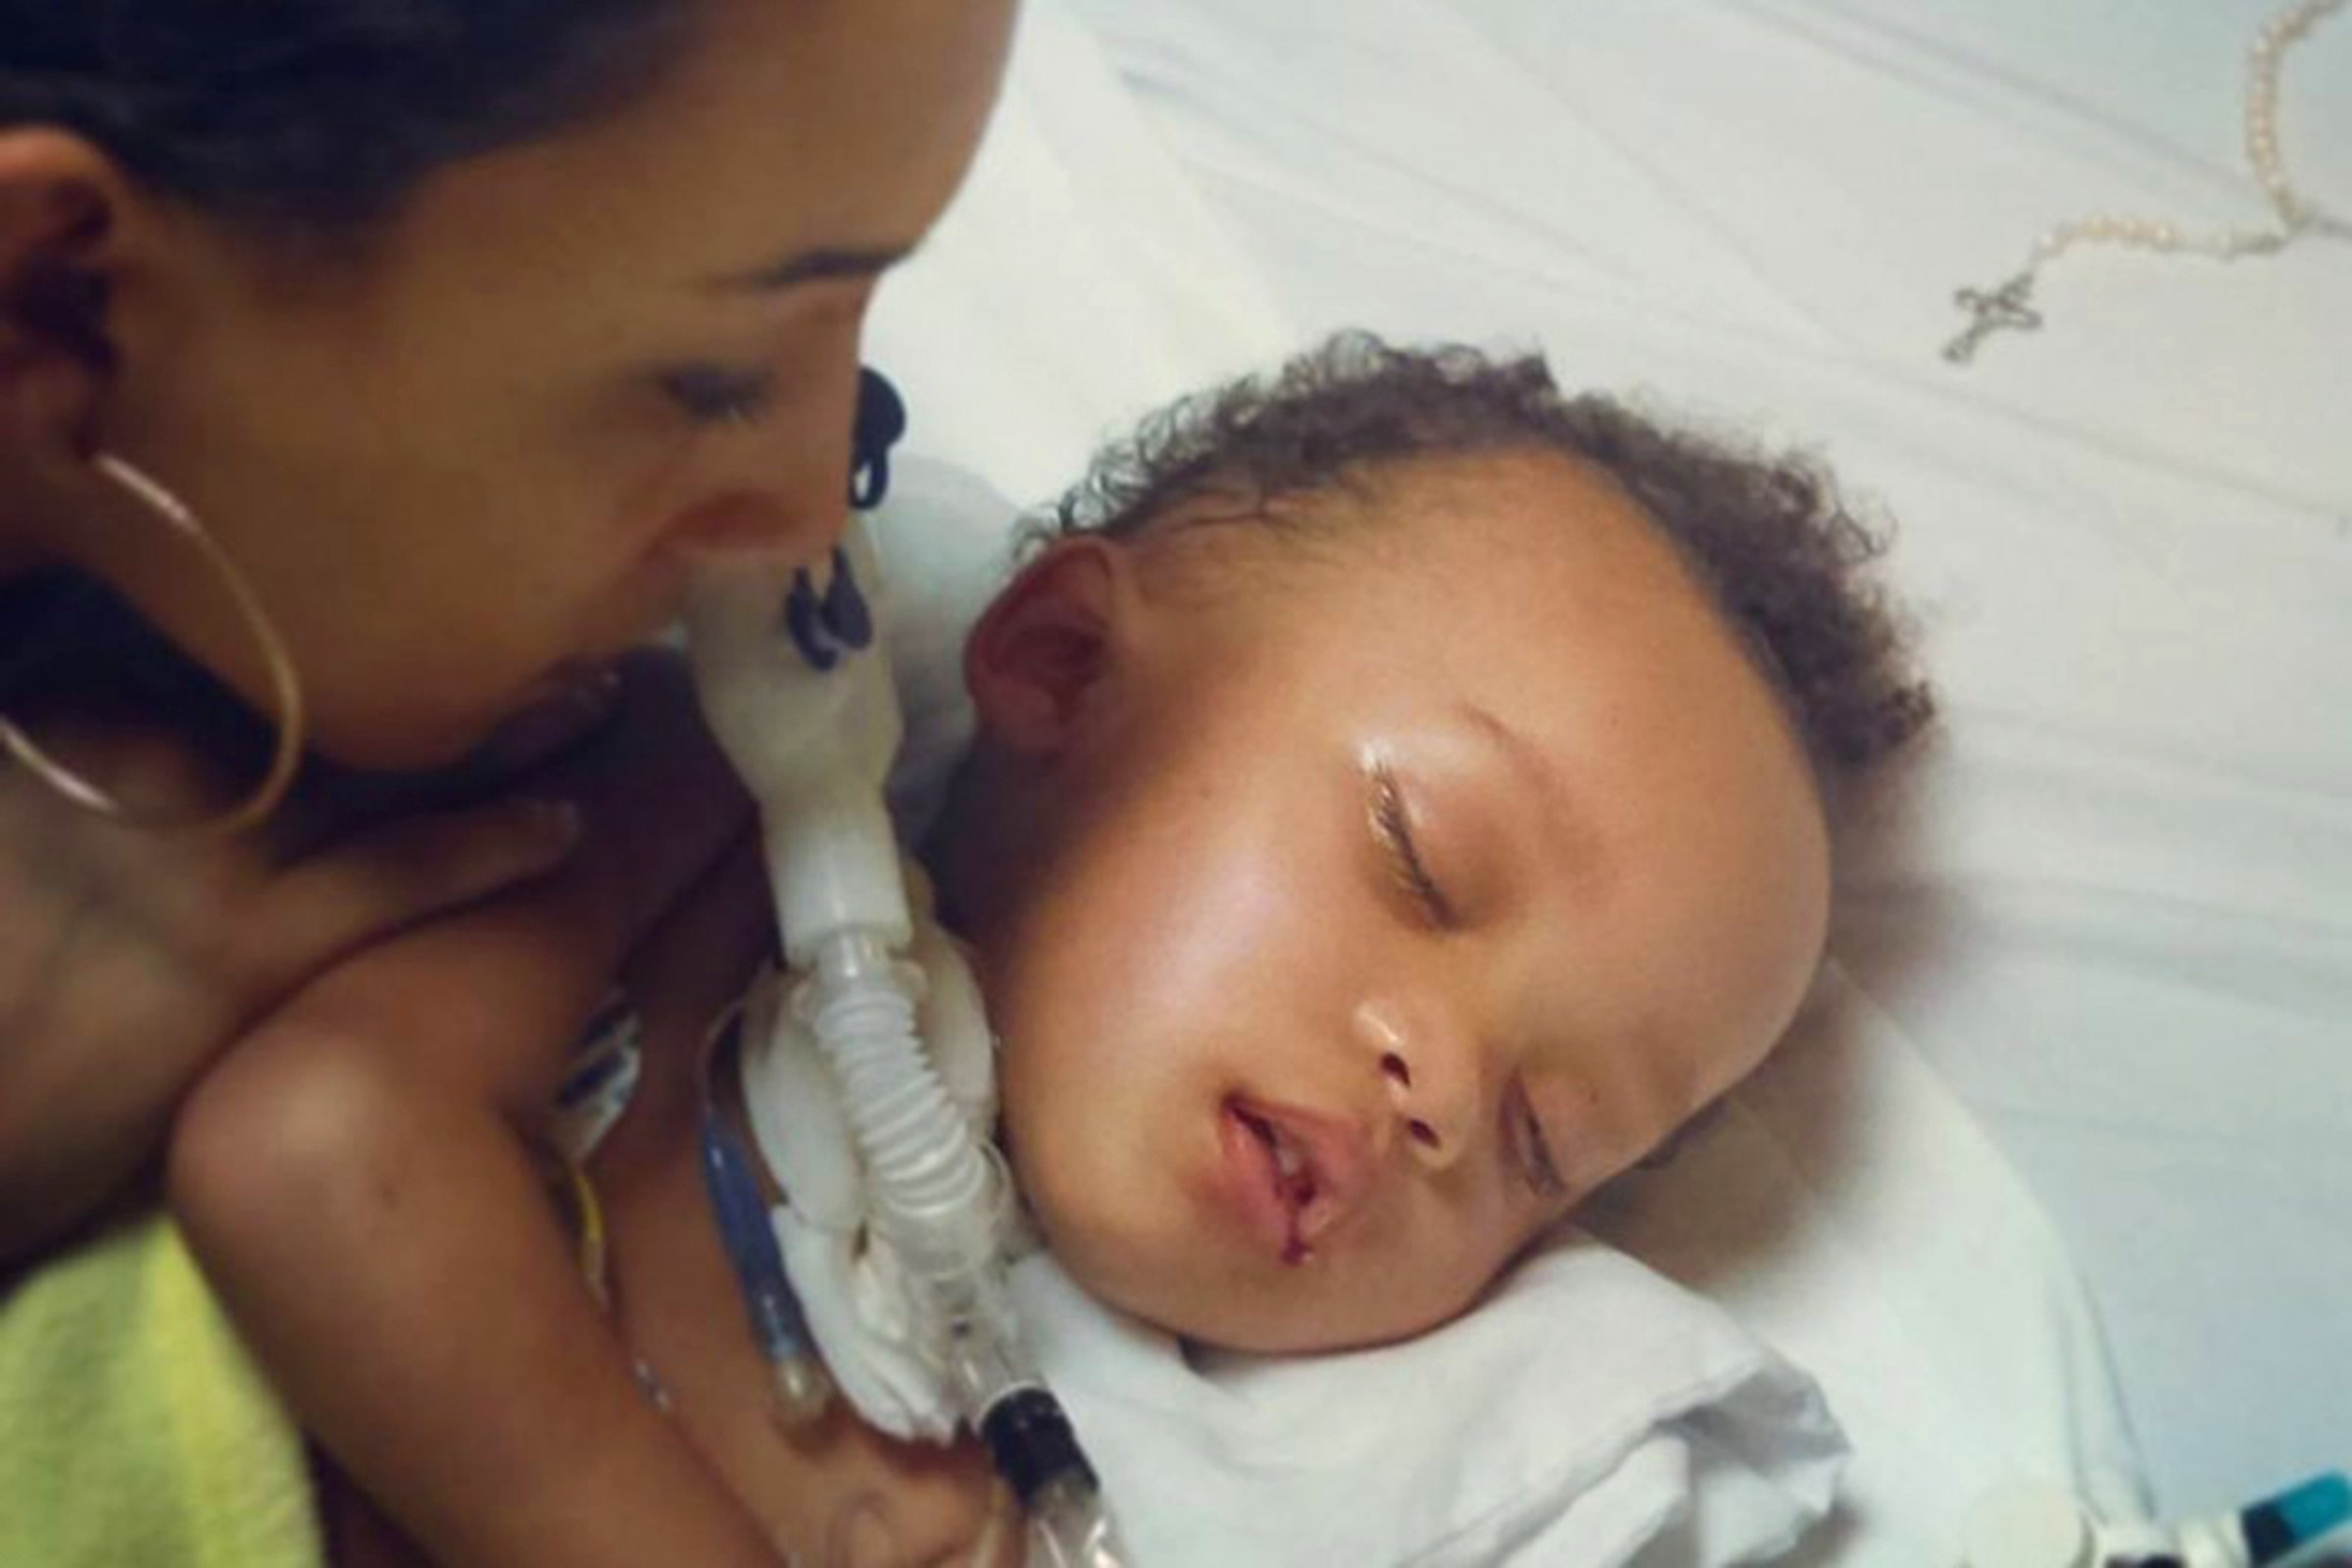 This undated photo provided by Jonee Fonseca shows her with her 2-year-old son Israel Stinson while on life support in a California hospital. The brain-dead toddler died Thursday, Aug. 25, 2016, soon after being taken off life support under a judge's order, bringing a sudden end to a complex legal battle that had appeared it was going to go on much longer. A Los Angeles Superior Court judge Thursday ruled to dissolve the temporary restraining order keeping Stinson on life support. (Courtesy Jonee Fonseca via AP)